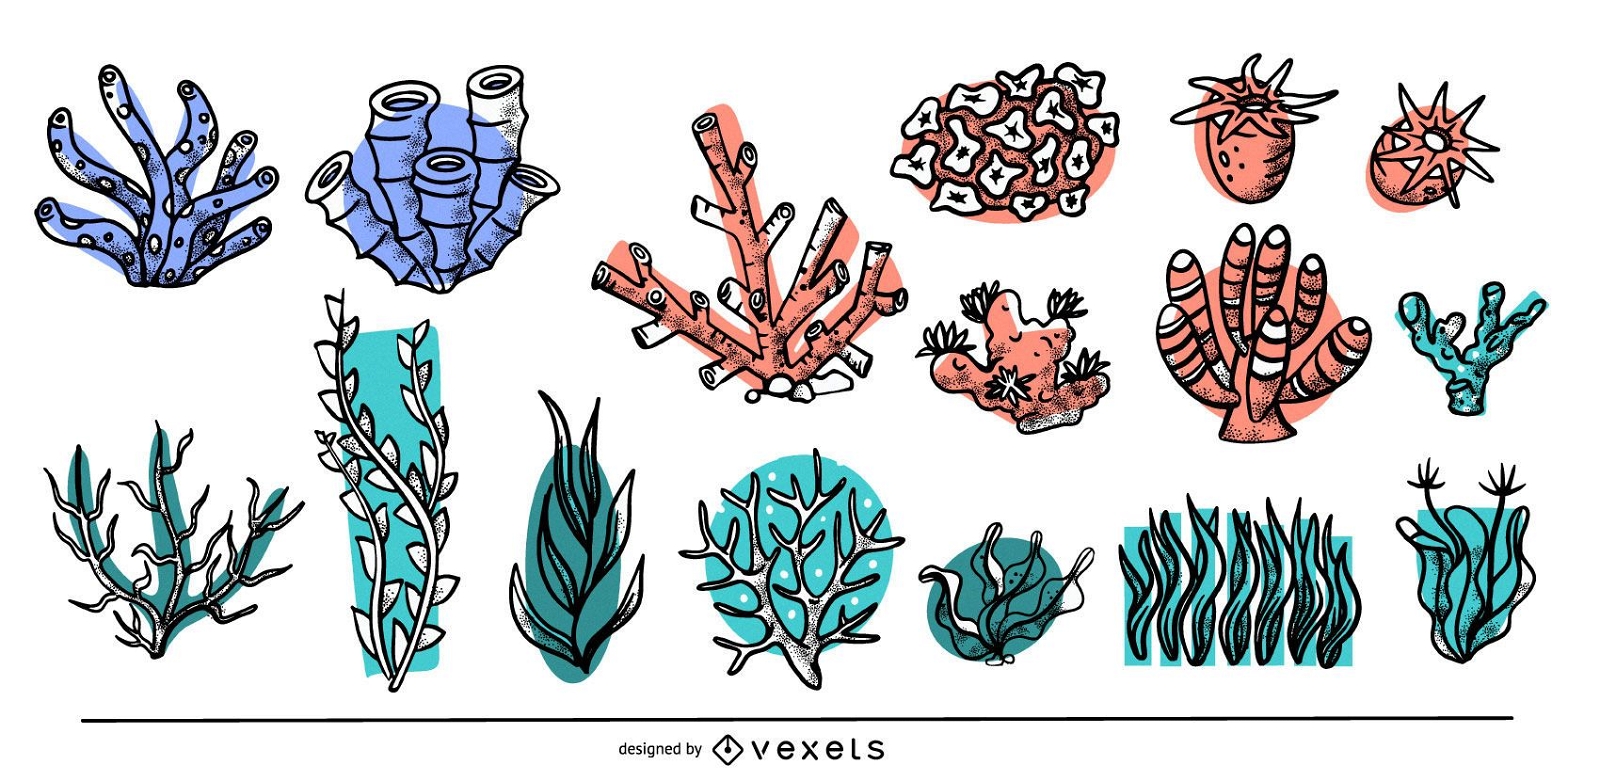 Colored seaweed collection